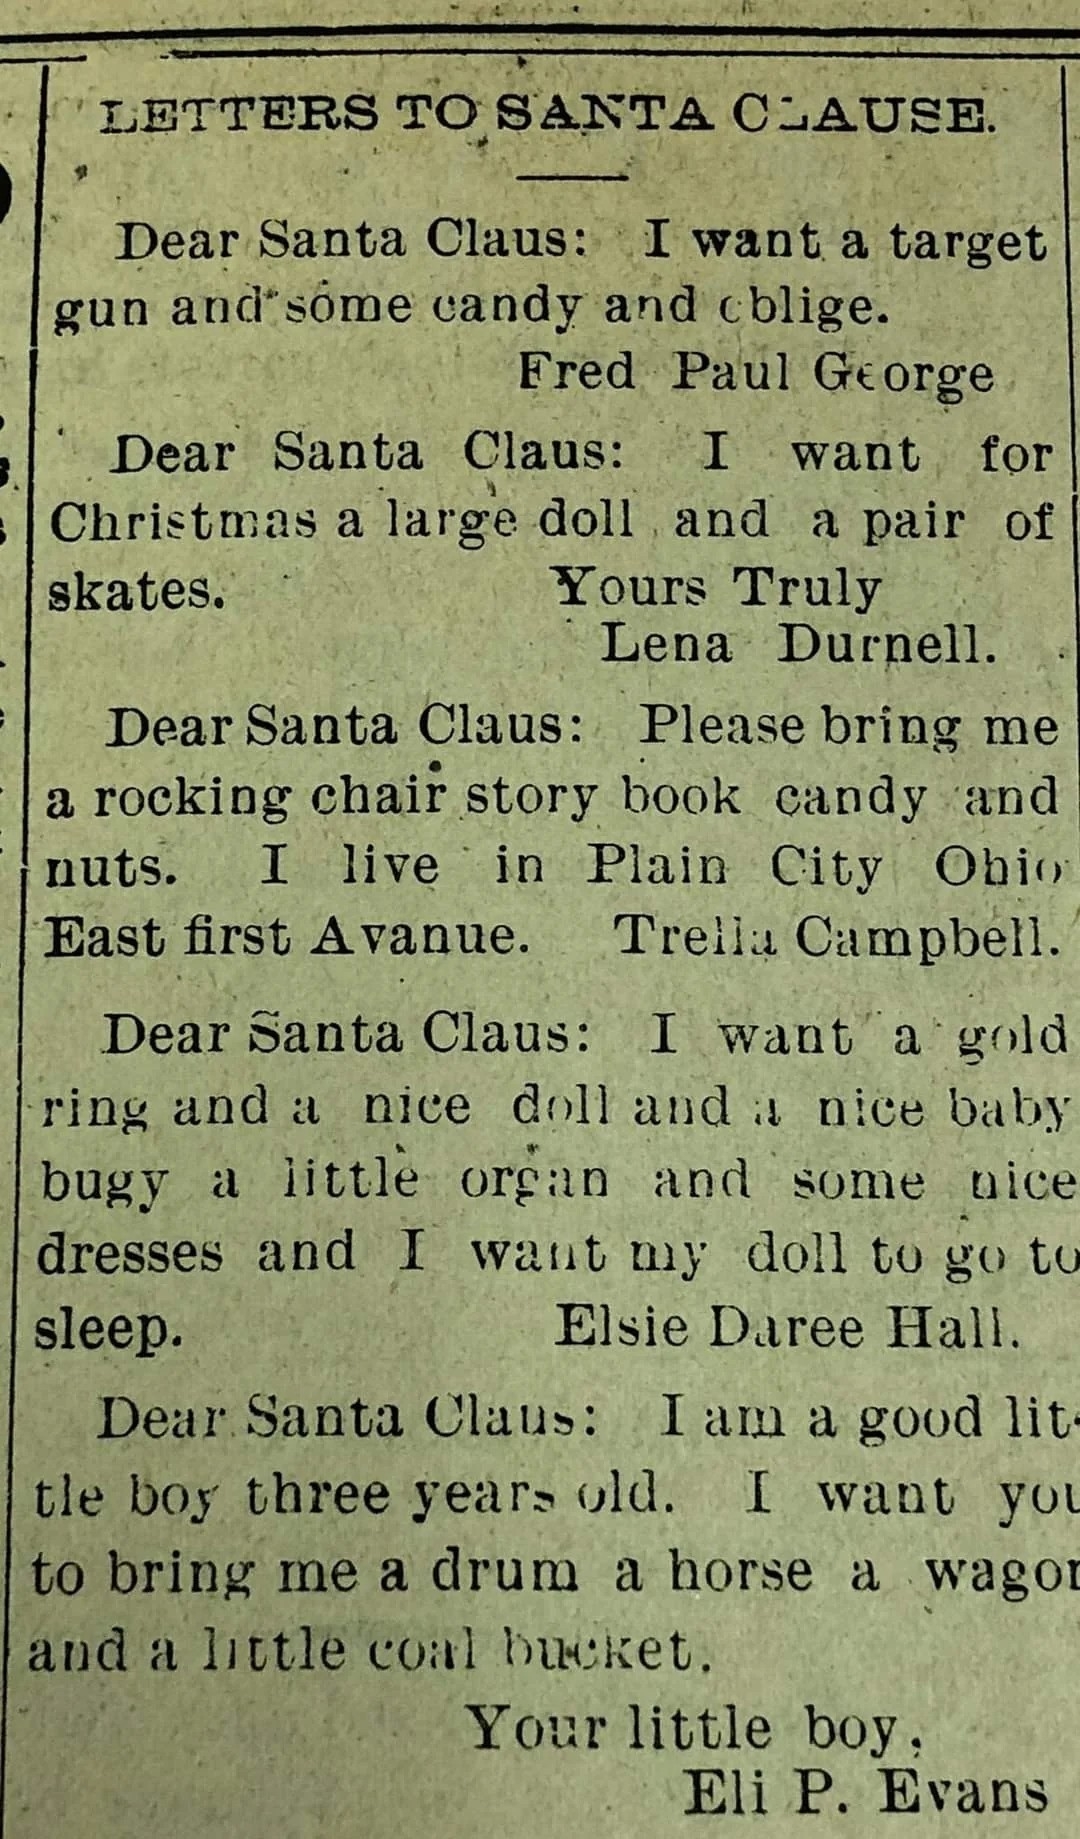 Summary of letters to Santa Claus from Fred, Paul, and Elsie, requesting gifts such as a drum, skates, dresses, and a horse